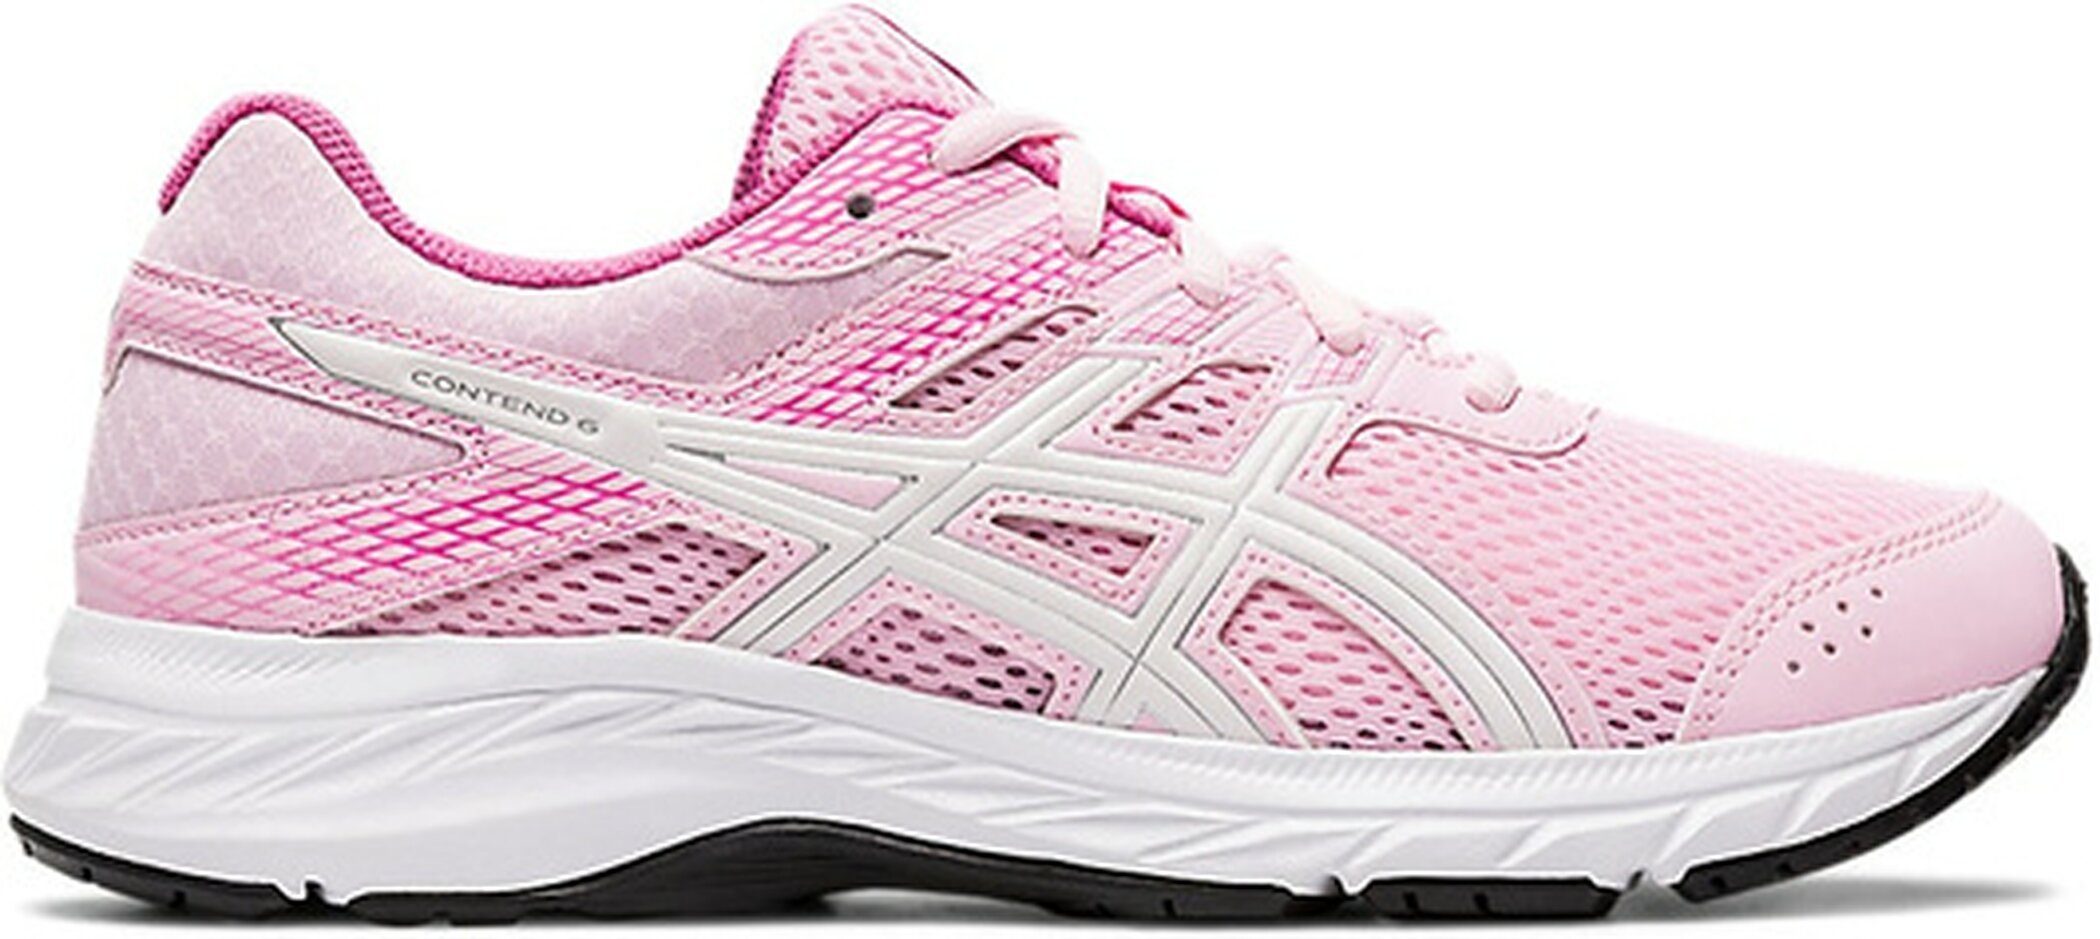 Asics CONTEND 6 GS PINK CAMEO/ROSELLE Laufschuh